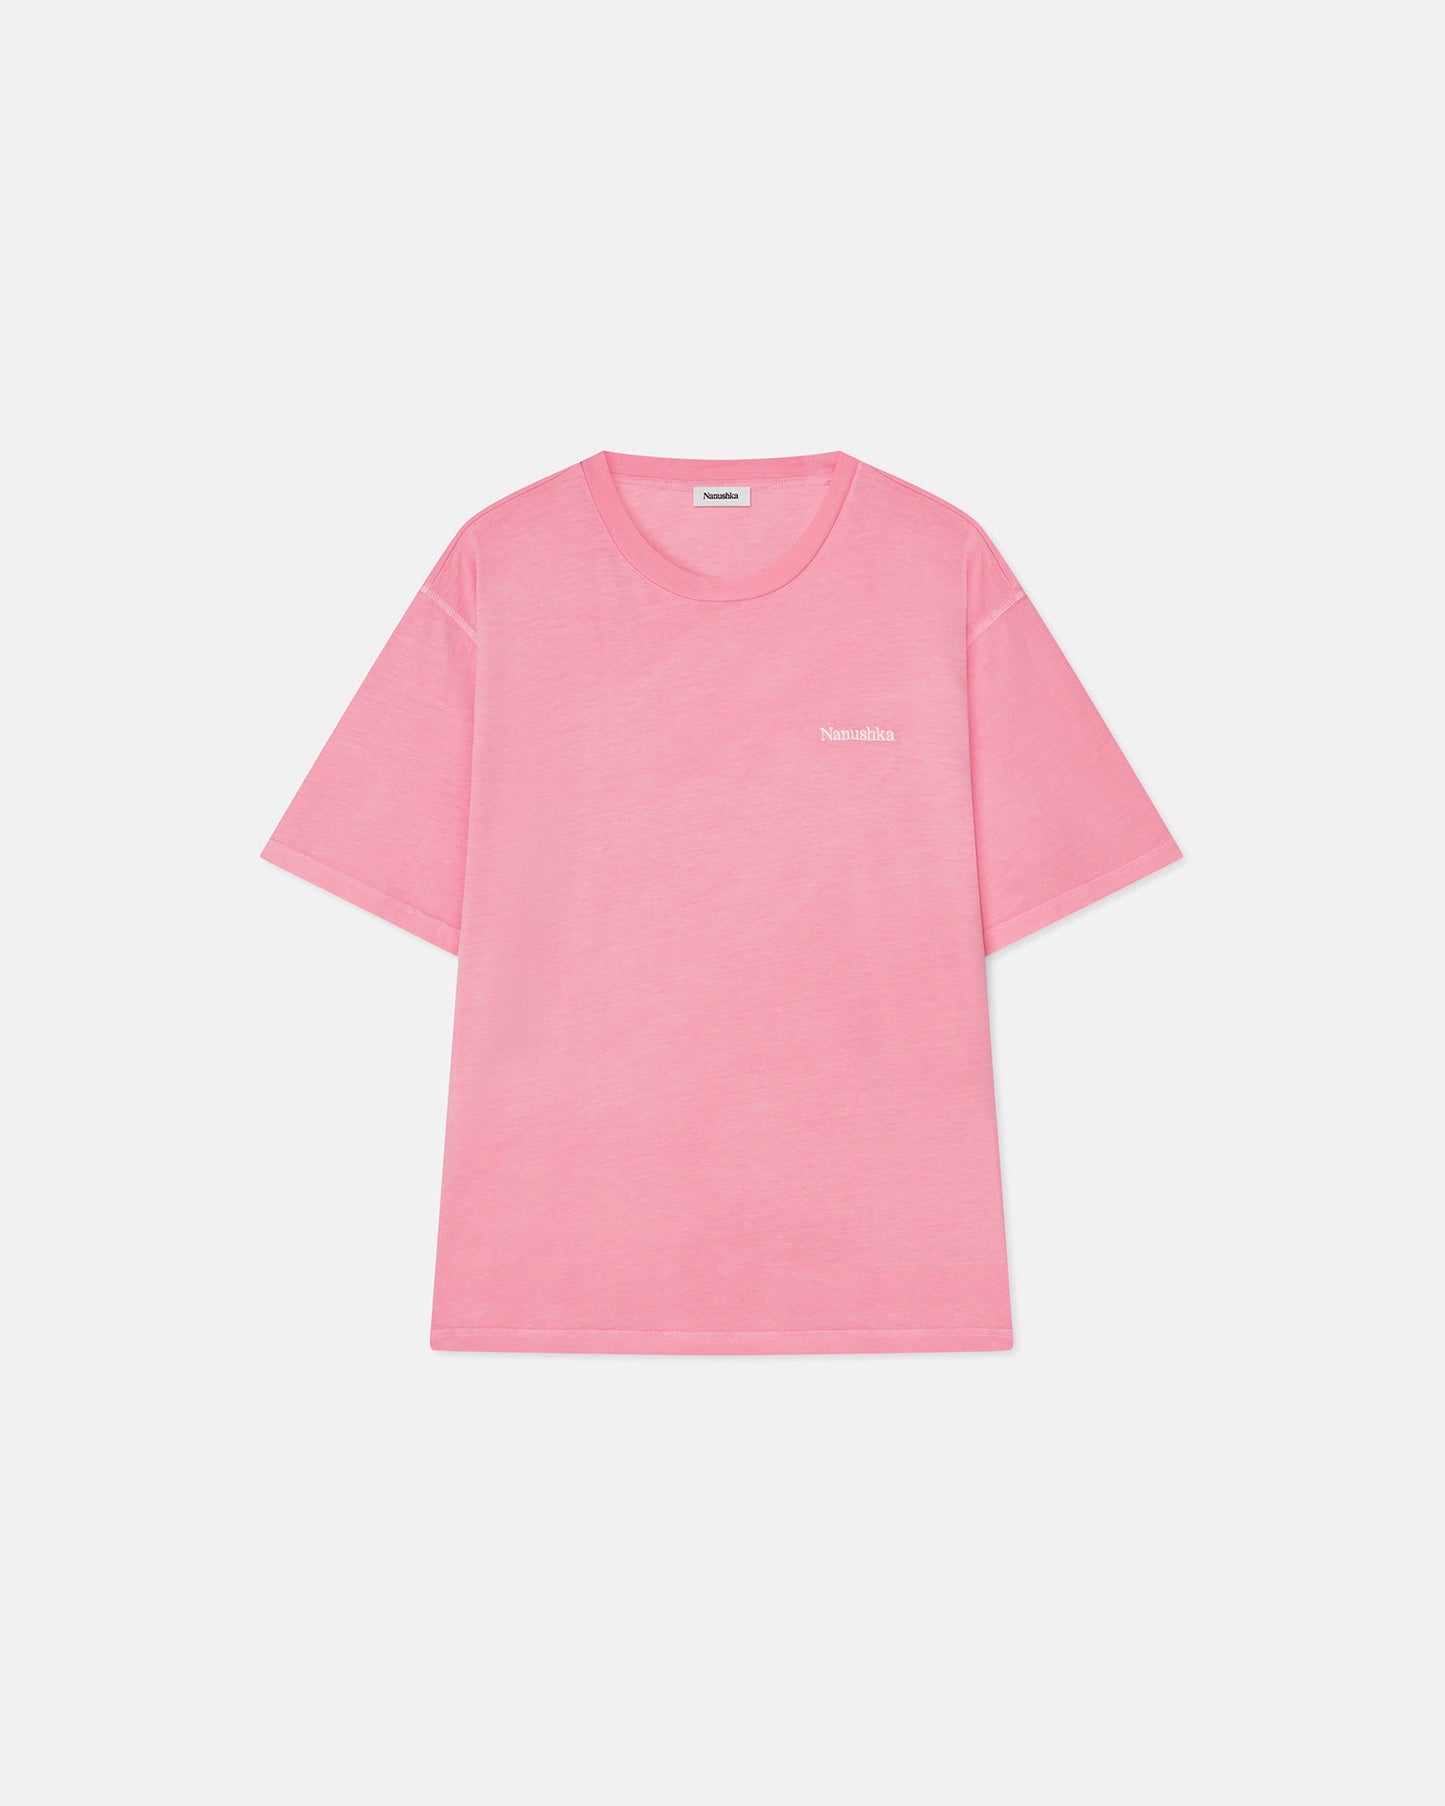 Reece - Organically Grown Cotton T-Shirt - Washed Pink Pf23